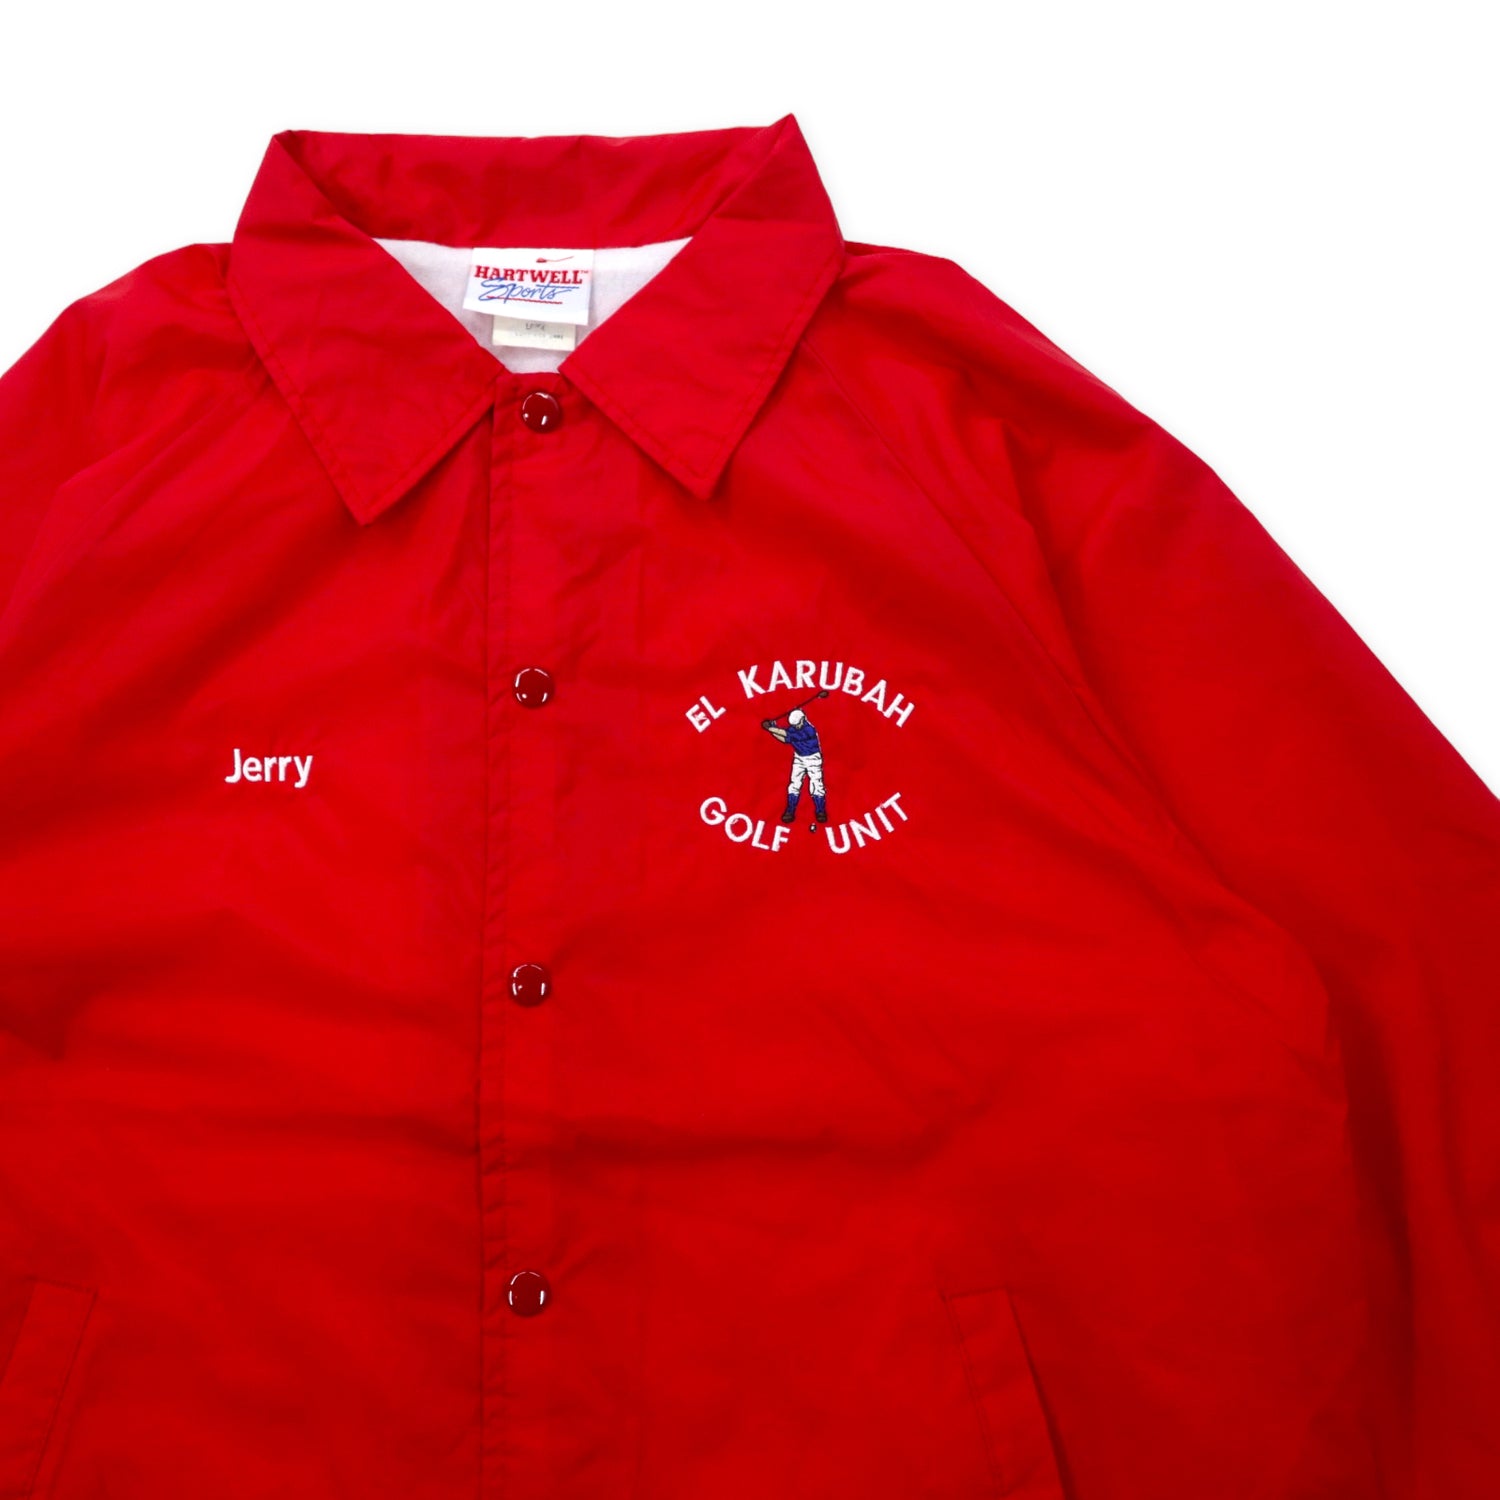 HARTWELL USA MADE 90s Coach jacket L Red Nylon EL KARUBAH Embroidery